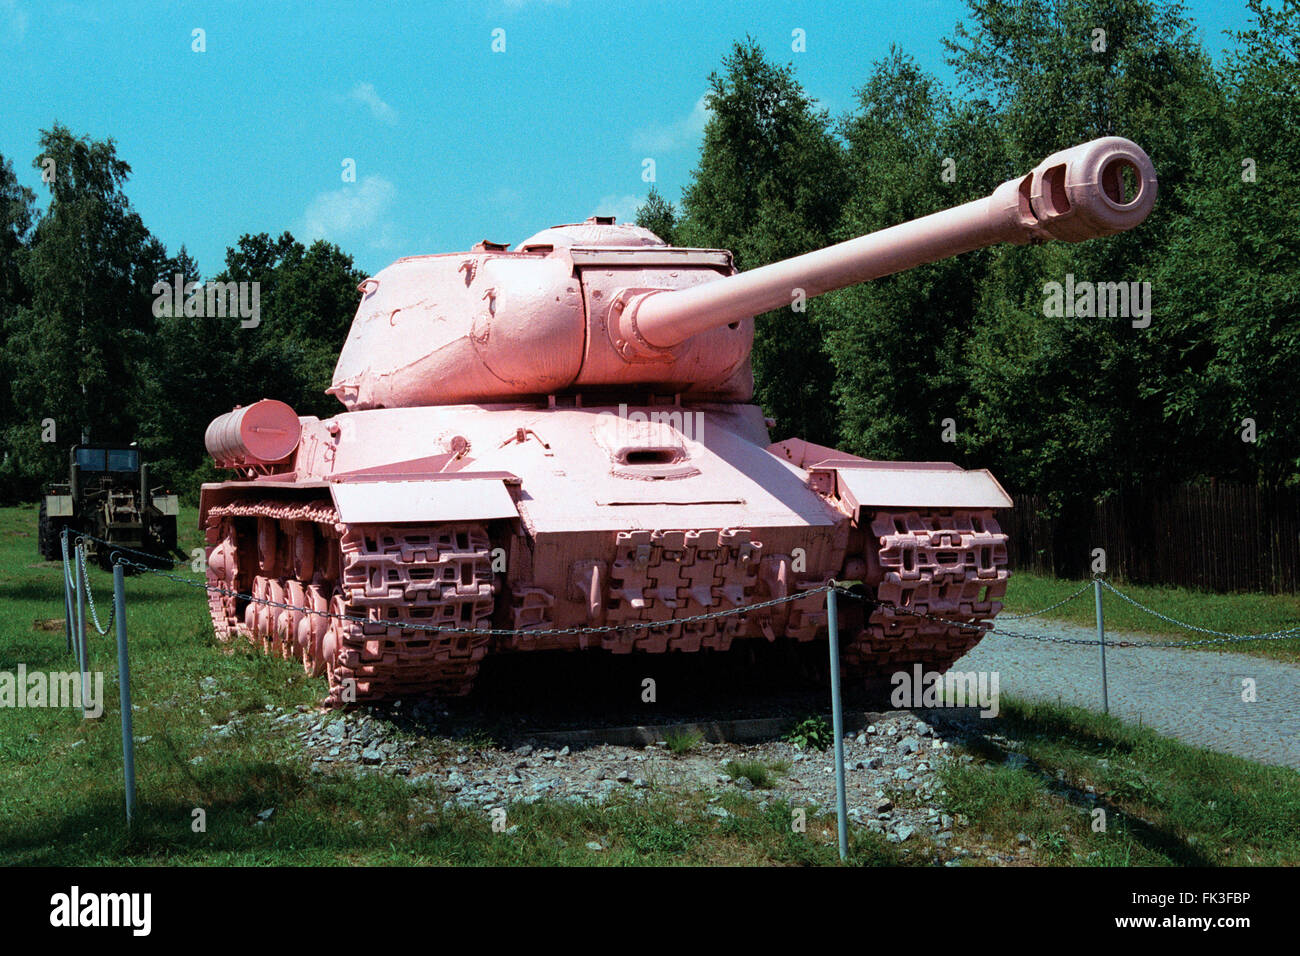 Famous Pink Tank IS-2 painted pink by Czech visual artist David Cerny displayed in the Military Technical Museum in Lesany, Czech Republic. Soviet heavy tank IS-2 formerly known as No 23 used to be the Monument to Soviet Tank Crews in Prague, Czechoslovakia. It was controversially painted pink by art student David Cerny and friends in 1991 and later moved to the museum. The model IS-2 was named after Soviet dictator Joseph Stalin. Stock Photo